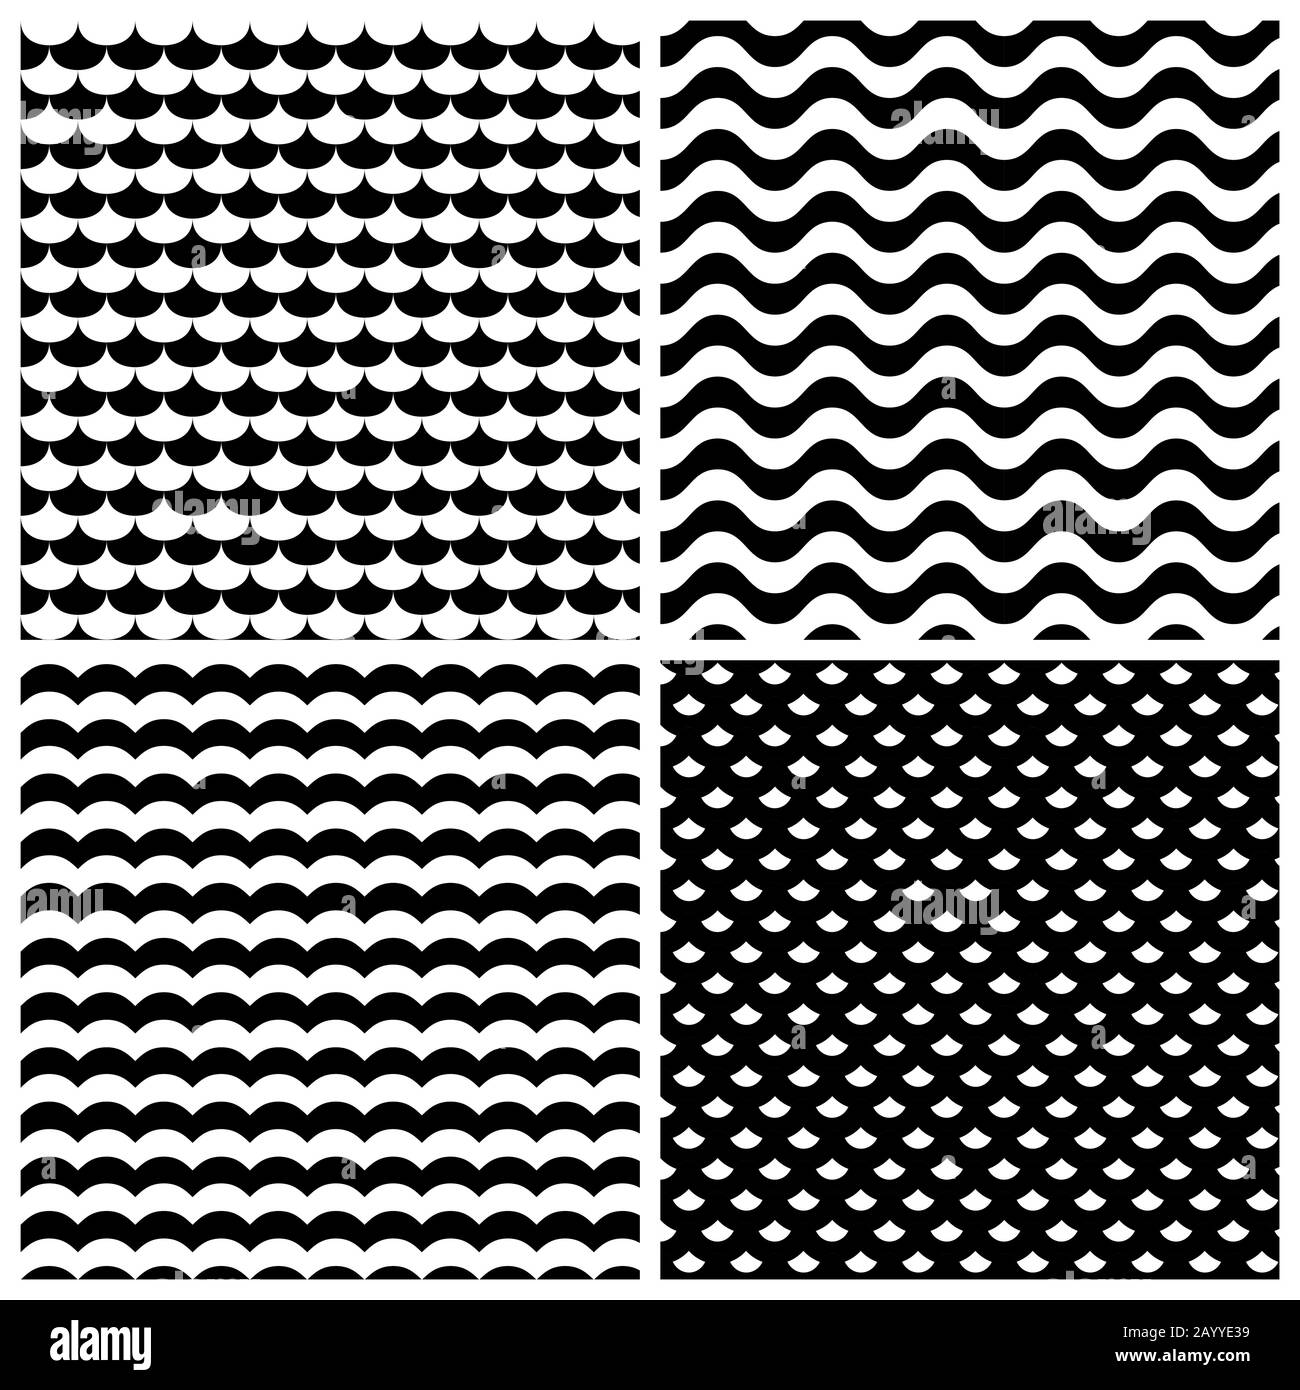 Waves patterns set in black and white. Background wave texture, vector illustration Stock Vector